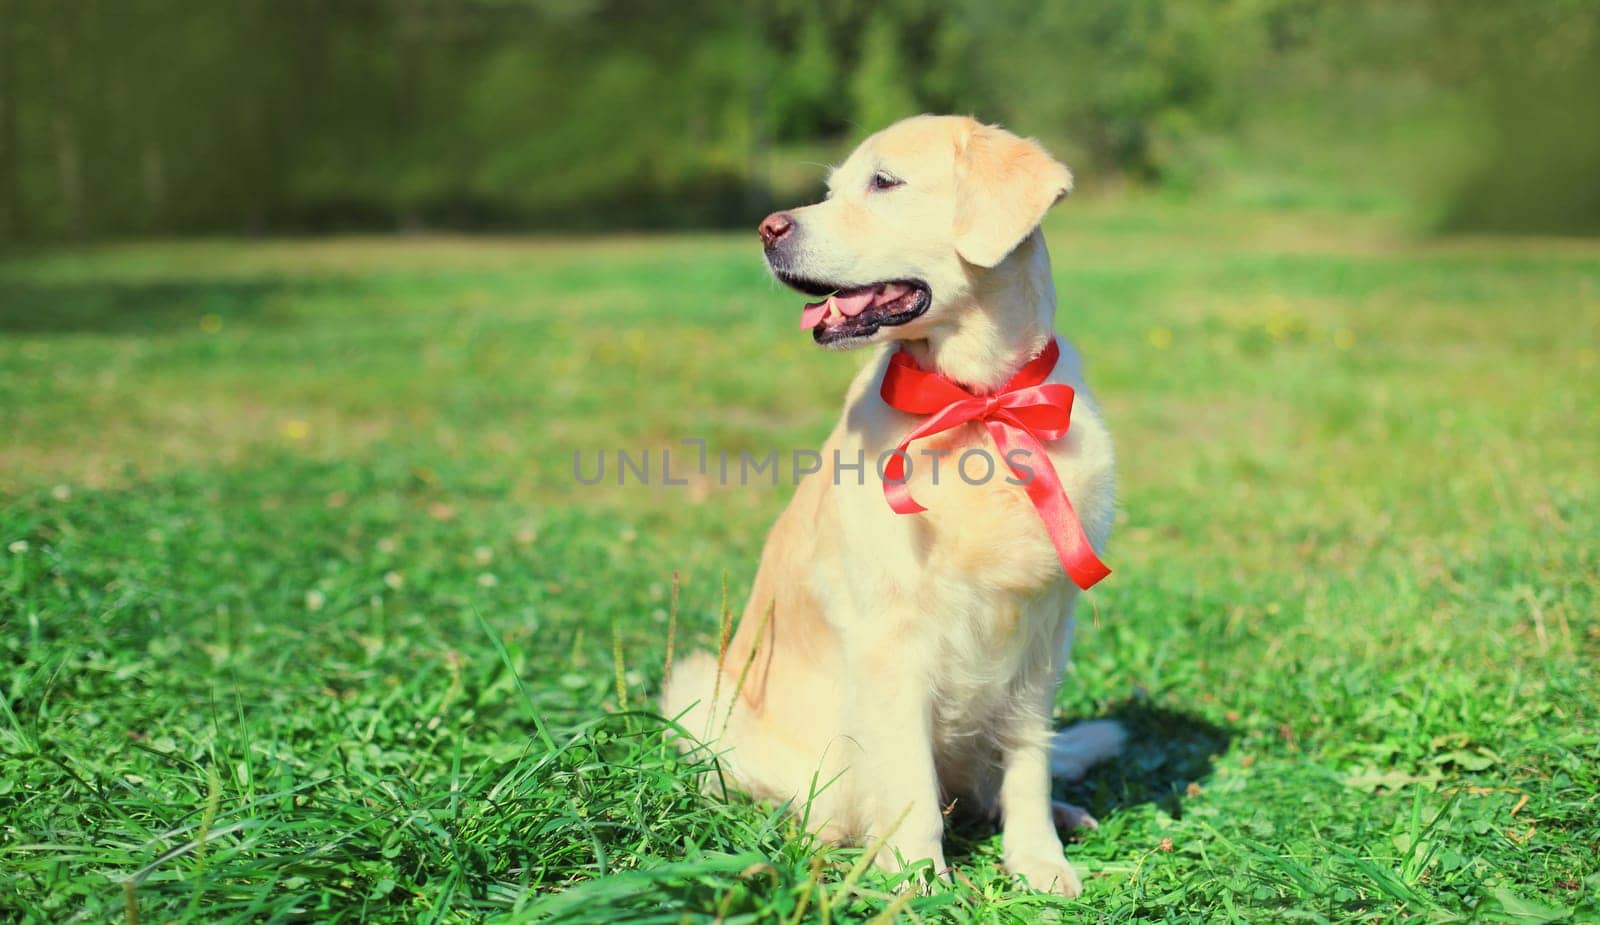 Portrait of Golden Retriever dog with red bow tie looking away sitting on green grass in summer park